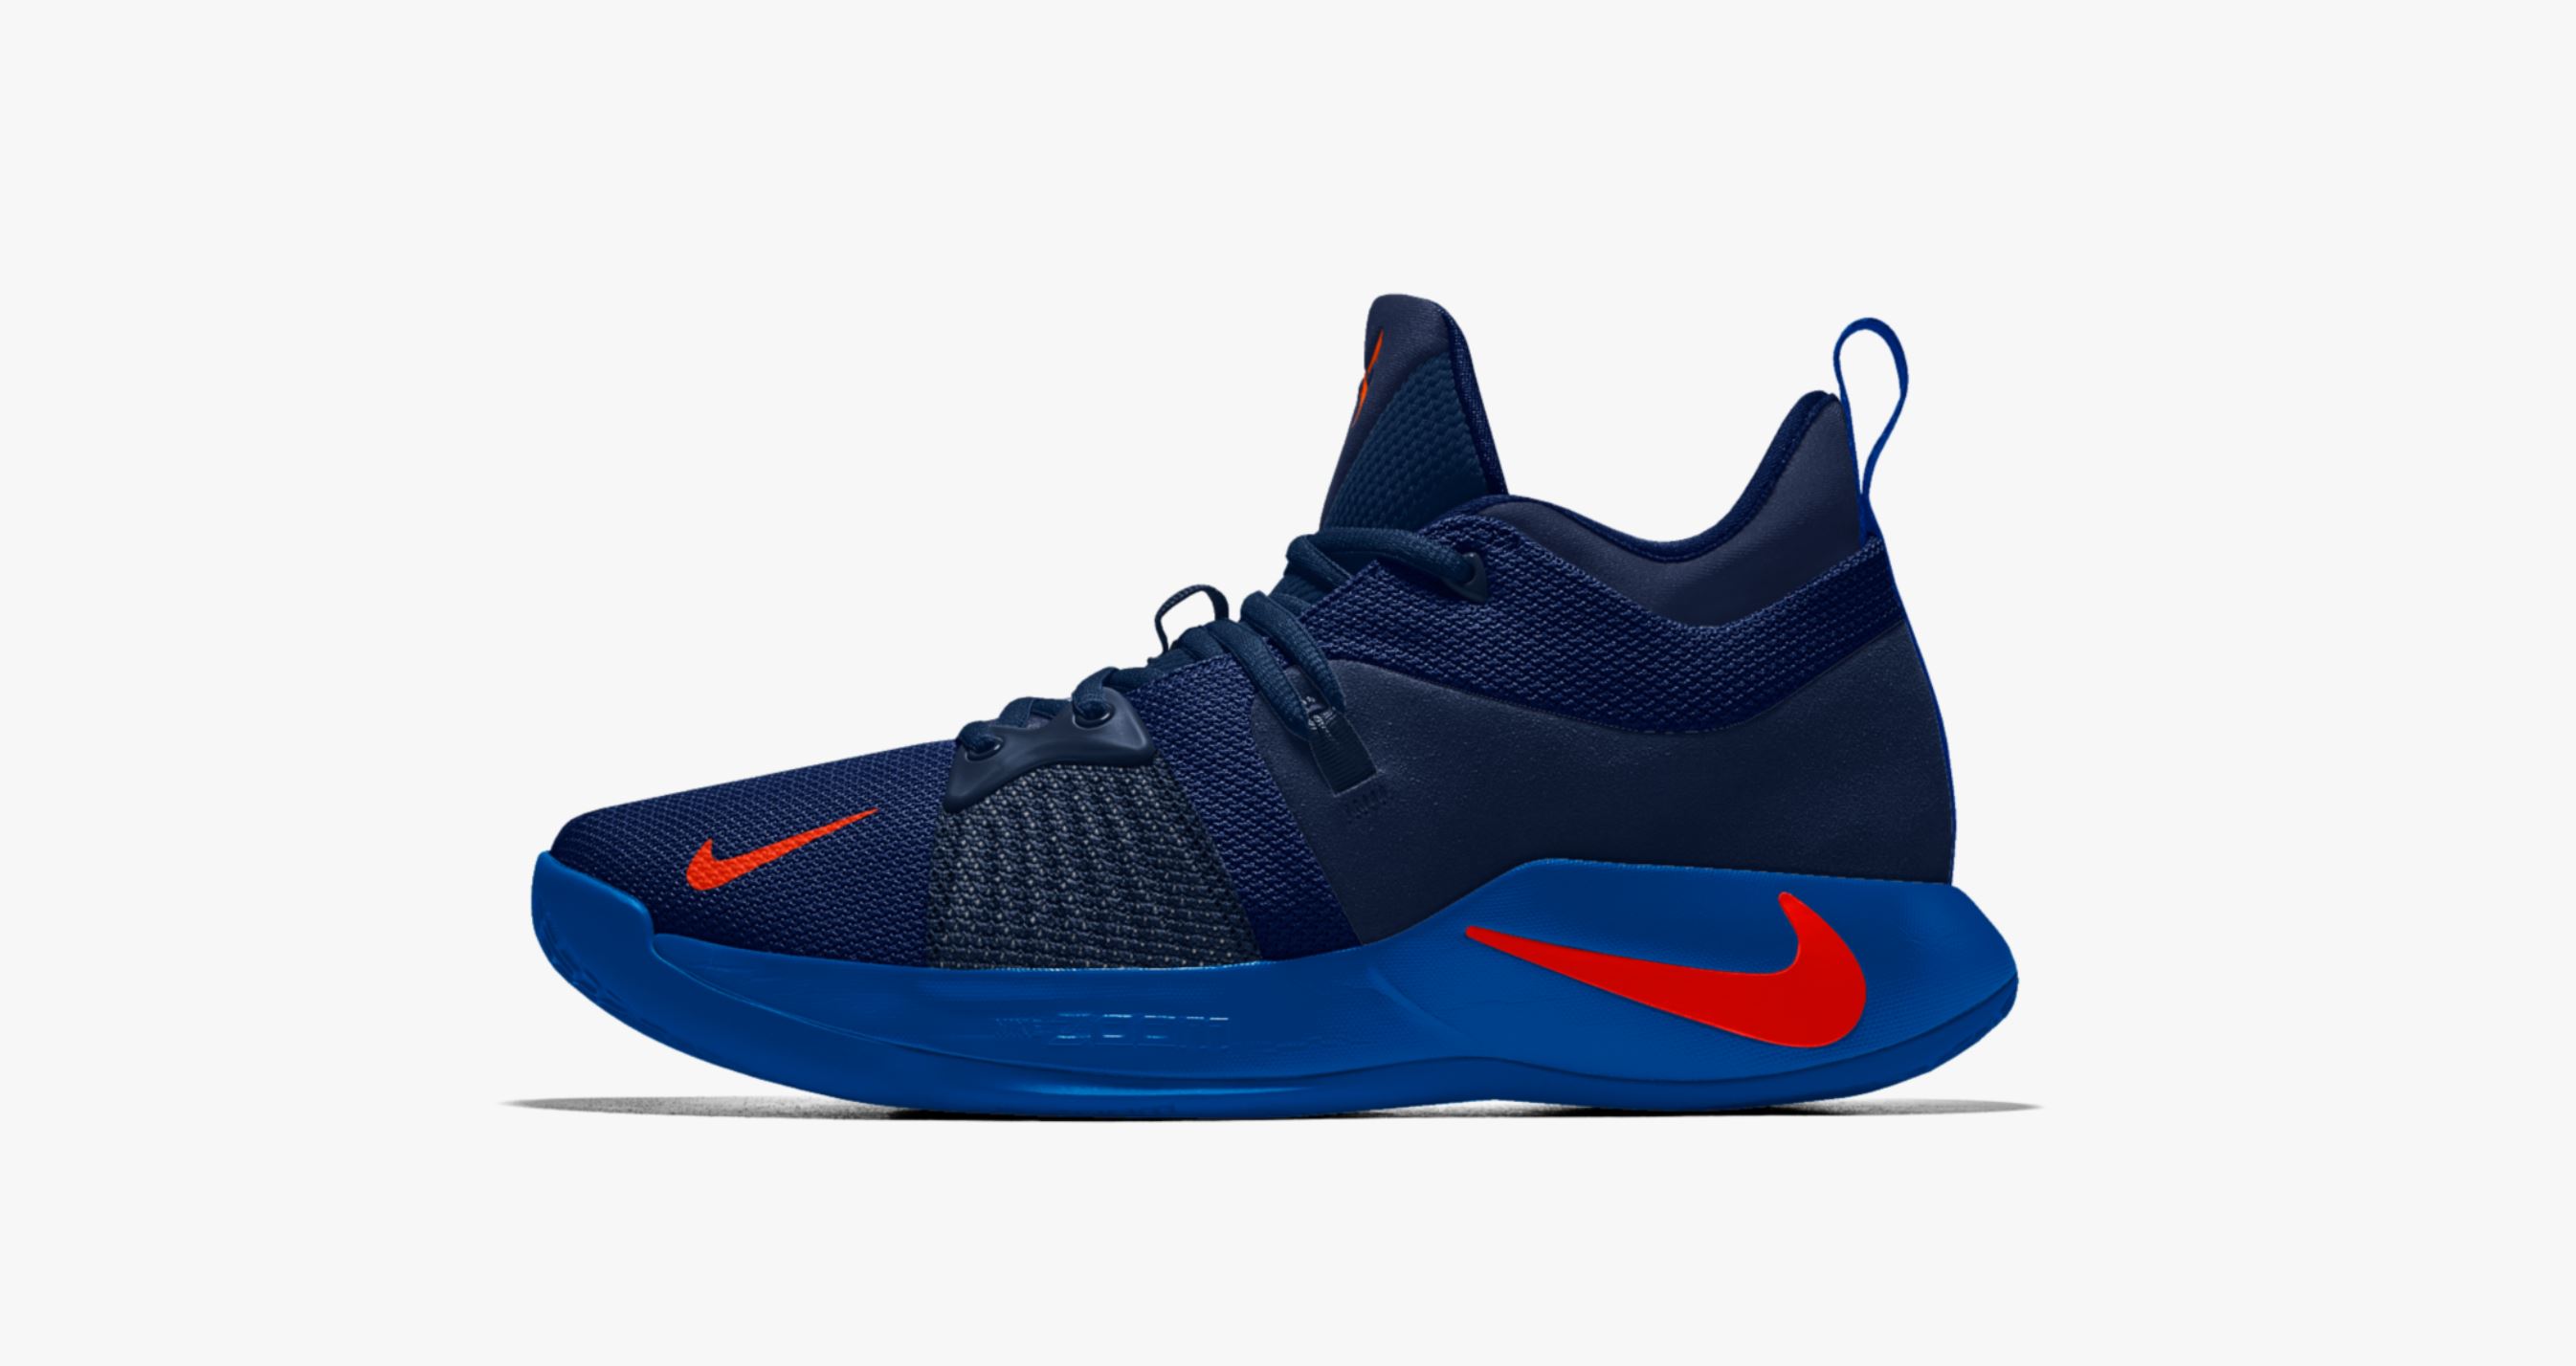 The Nike PG 2 is Now Available for 